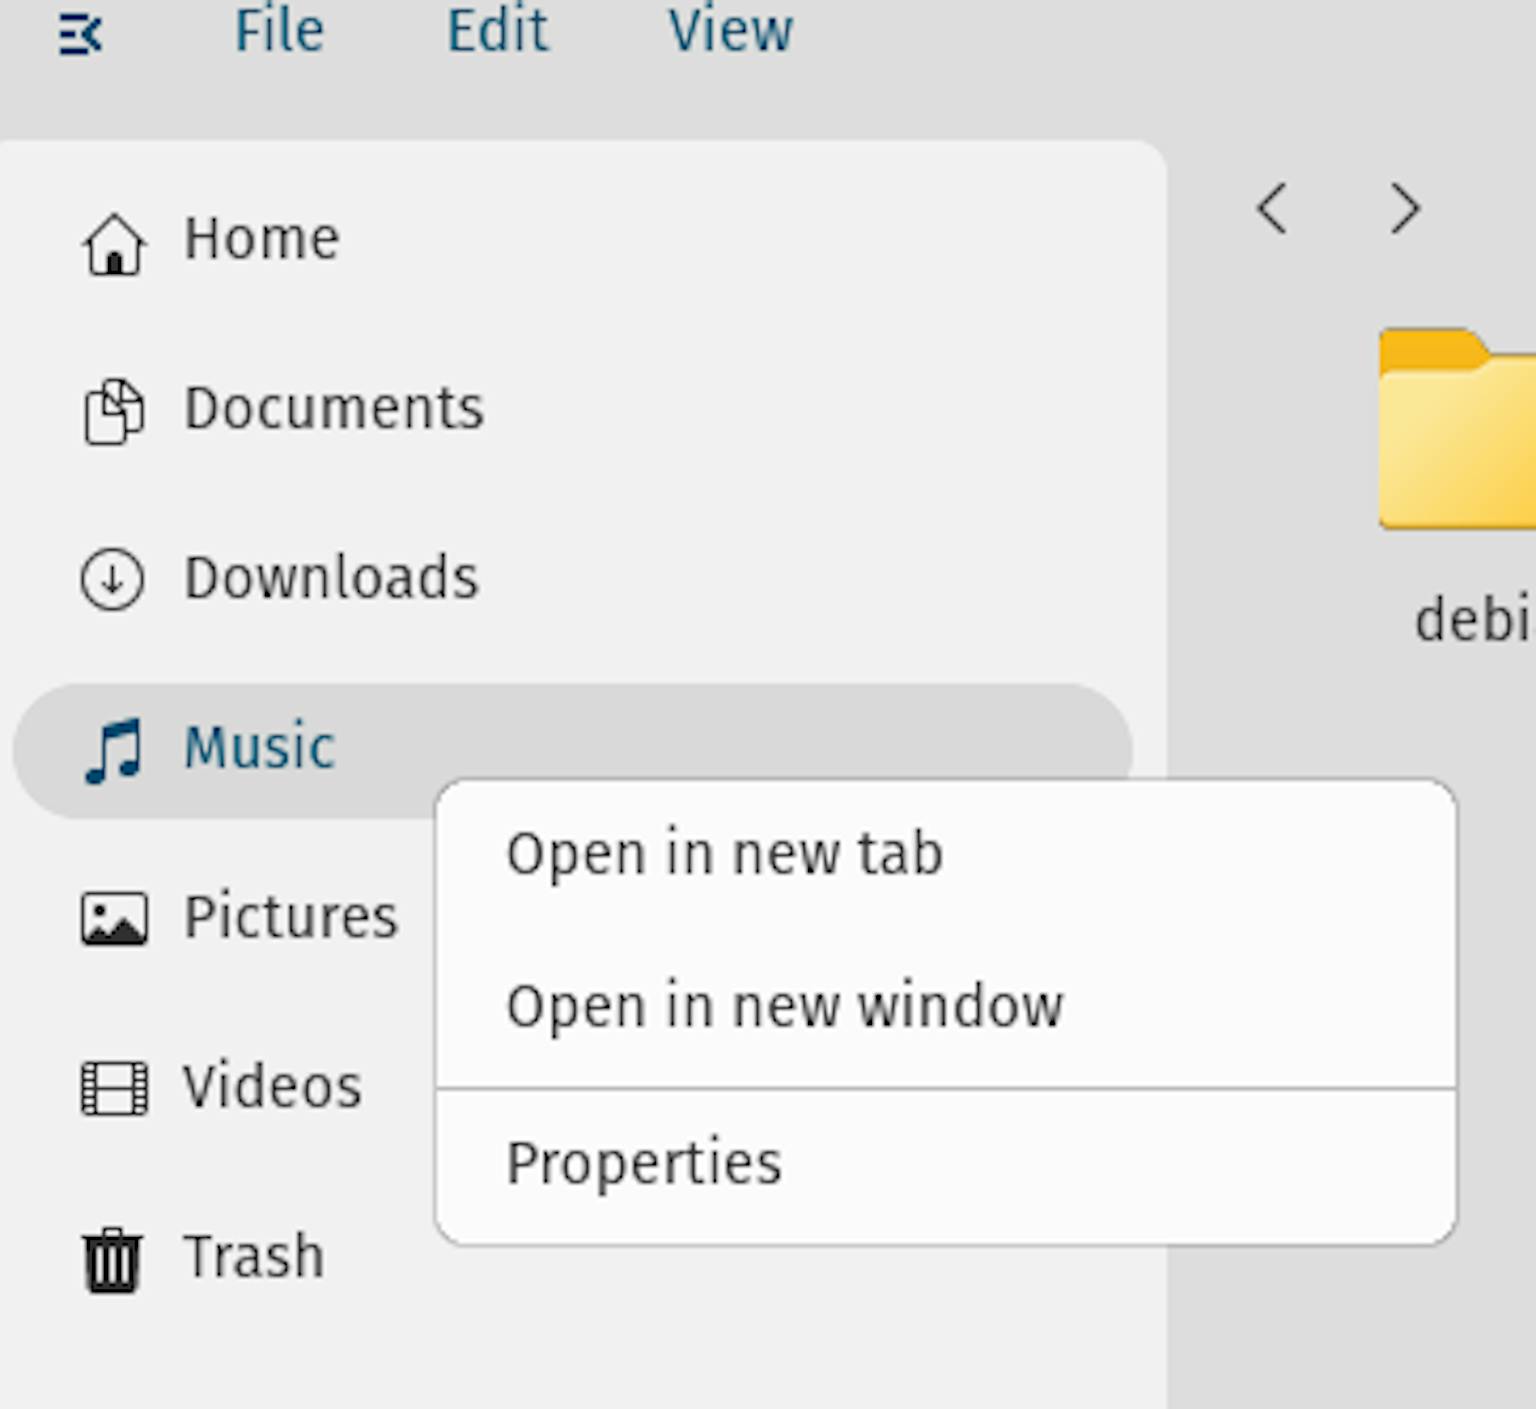 The  "Music" entry in COSMIC Files' navigation sidebar has been right-clicked. The resulting context menu shows options to open Music files in a new tab, open in a new window, or view Properties.